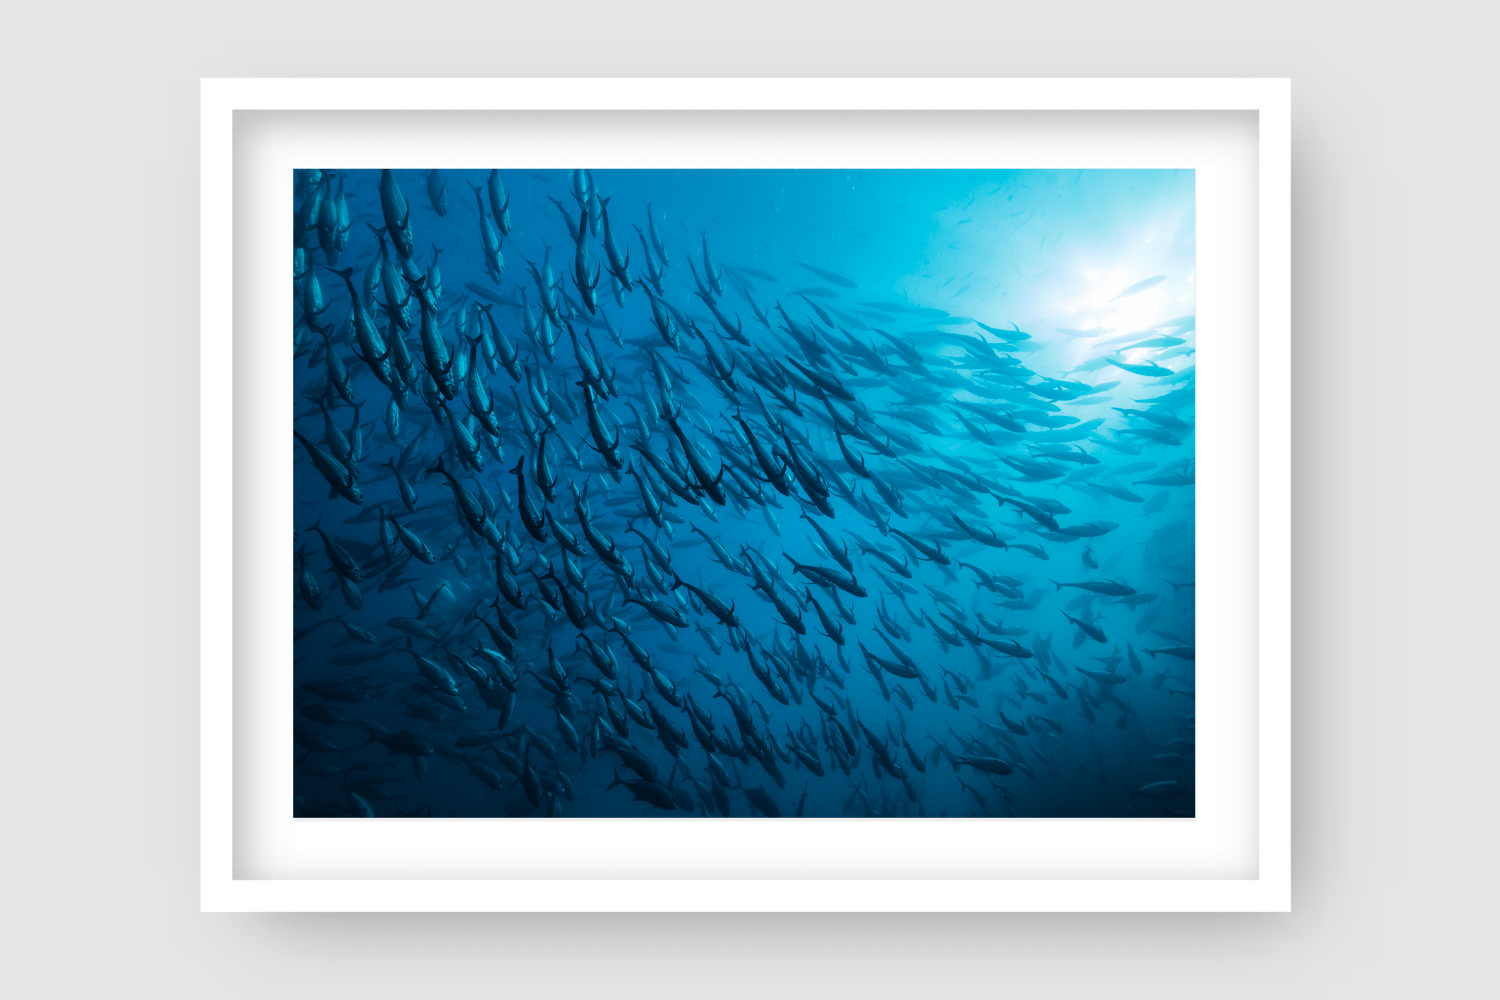 from below looking up to the bright surface of blue water with hundreds of fish swimming